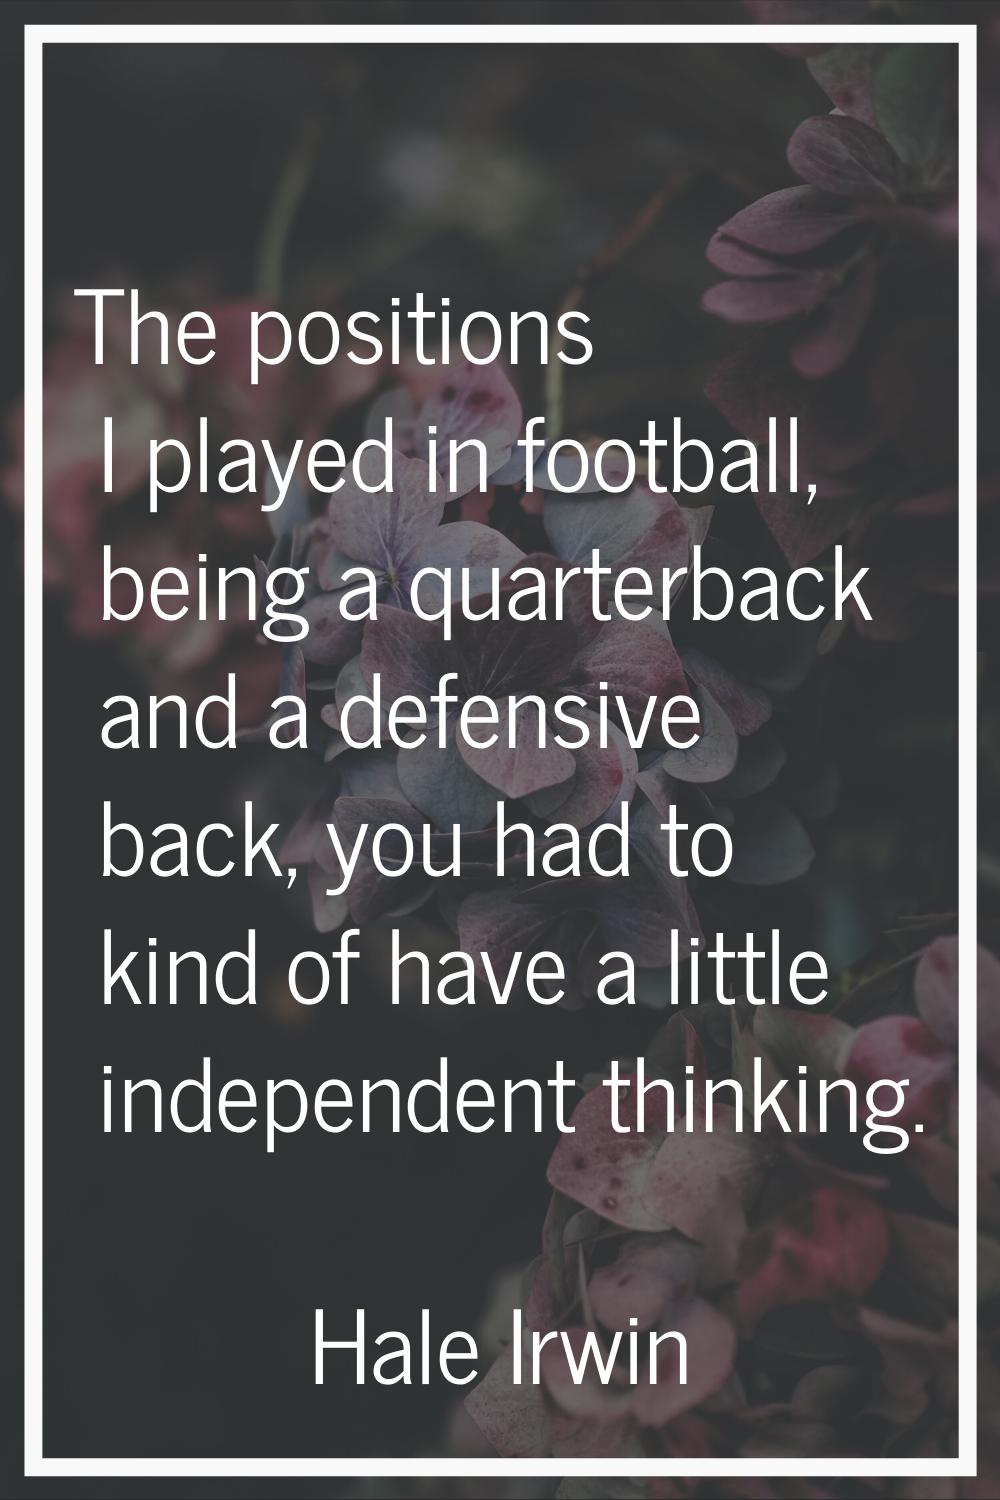 The positions I played in football, being a quarterback and a defensive back, you had to kind of ha